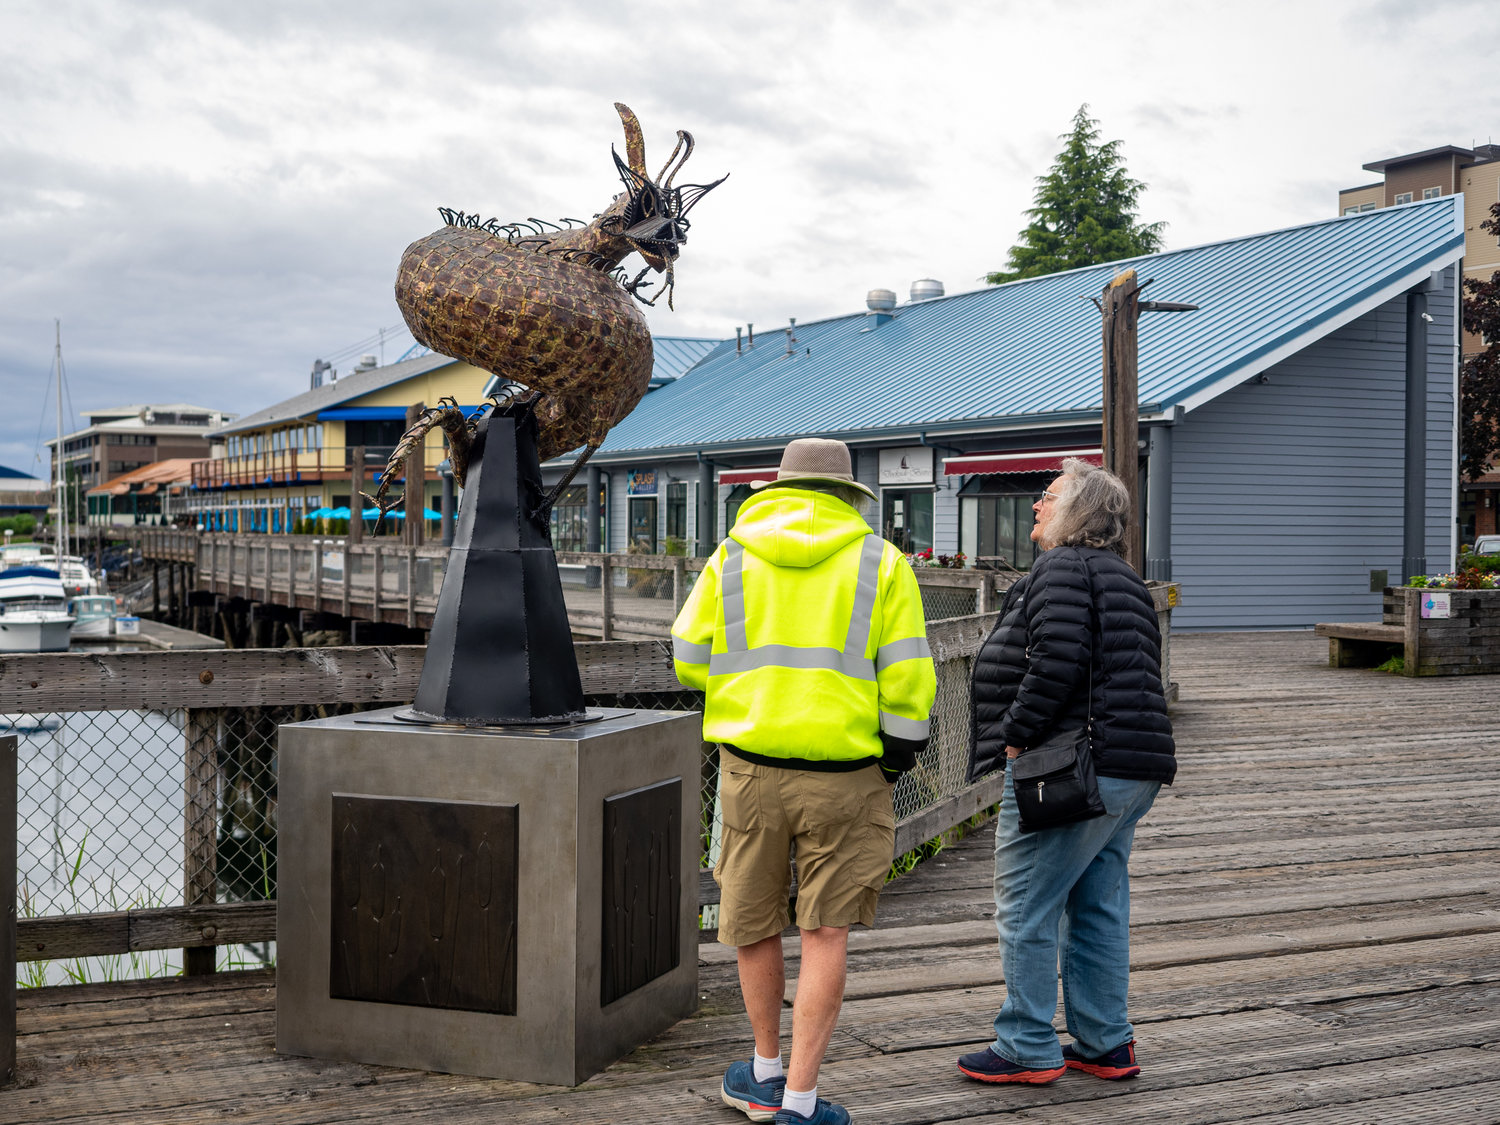 An older couple enjoying looking at the sculpture Guardian by Jim Johnson. Medium steel and copper. Percival Plinth Project sculptures on Percival Landing.